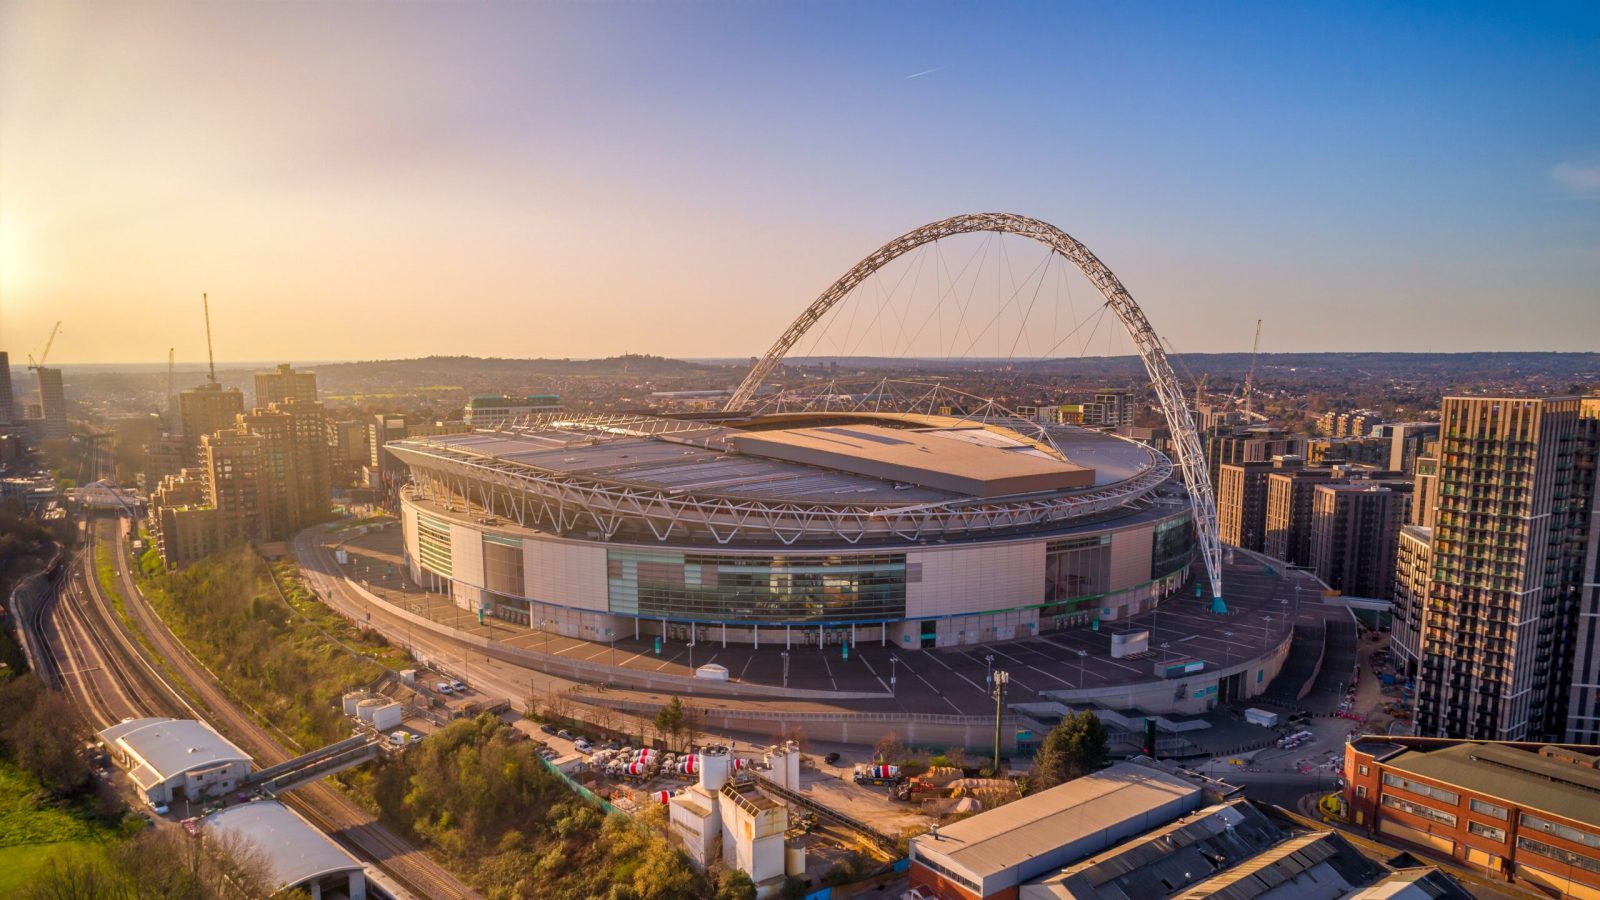 If You Can Get at Least 15 on This 20-Question World Landmarks Quiz, You Can Safely Travel the World Without Getting Lost Wembley Stadium, England